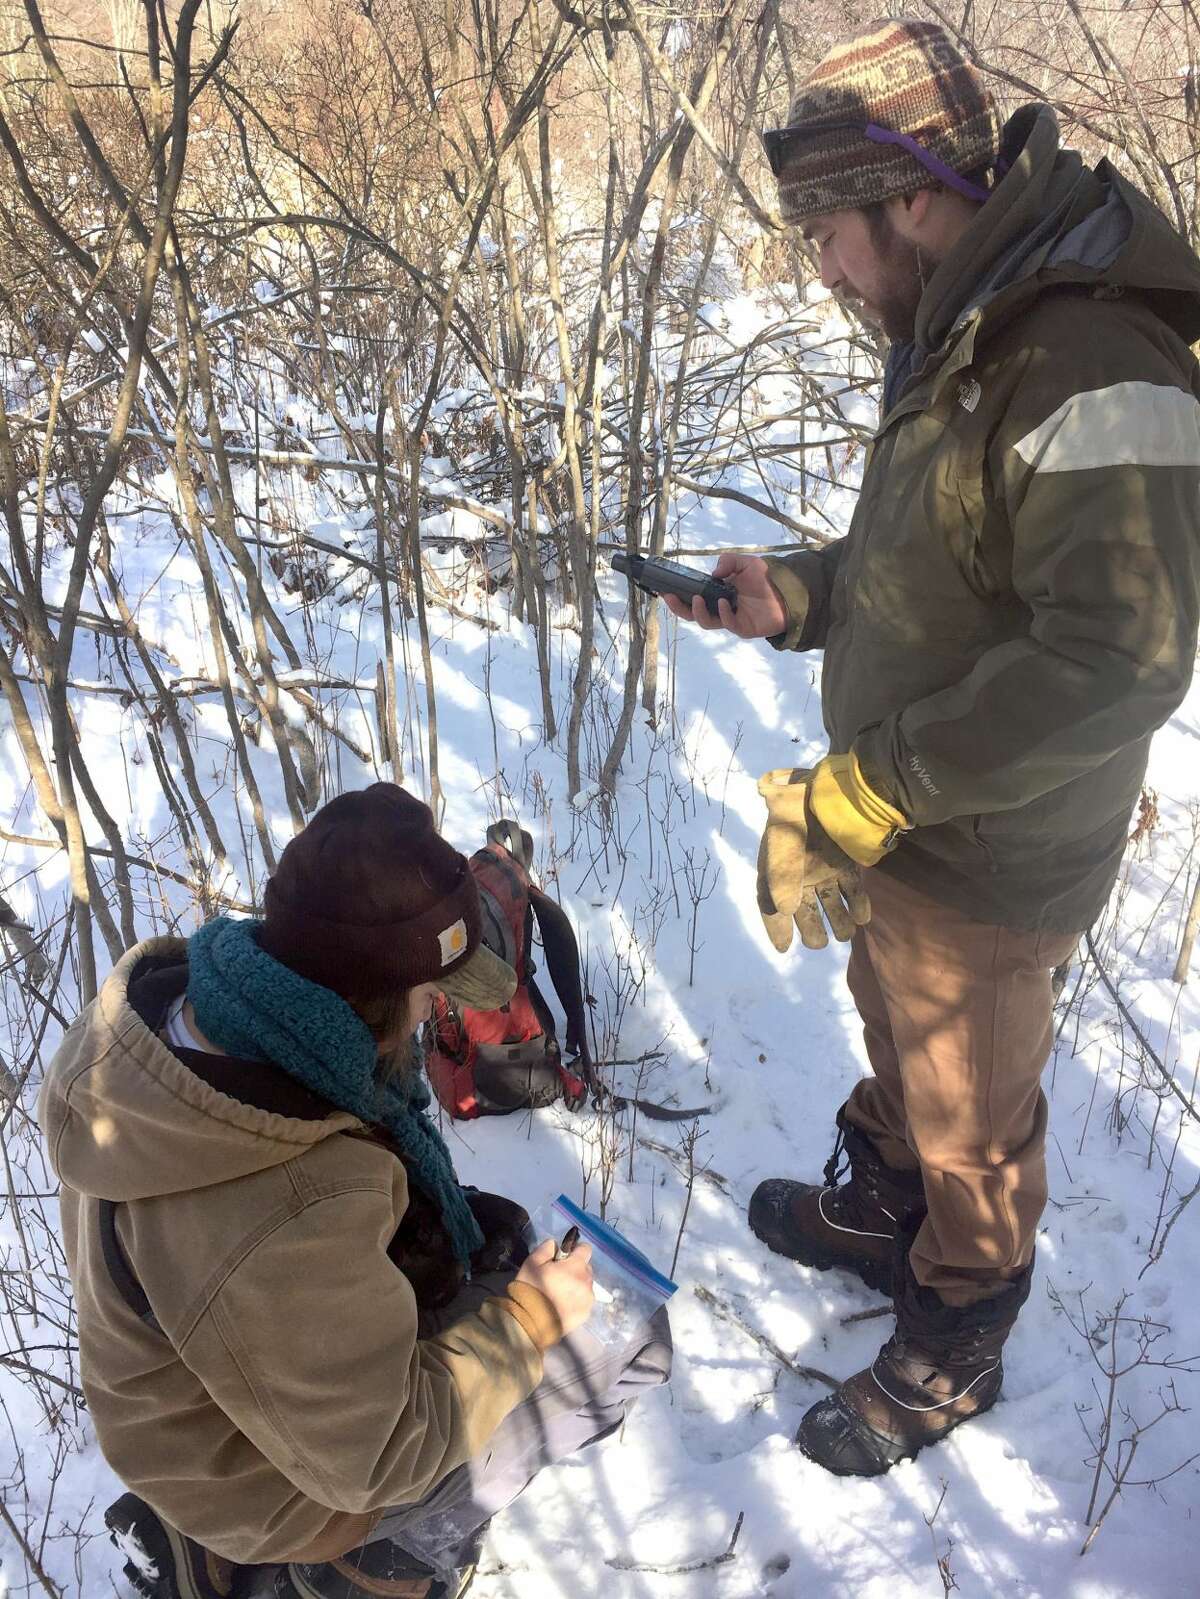 A group of ?“citizen scientists?” helped collect rabbit droppings at Macricostas Preserve in Washington last winter.